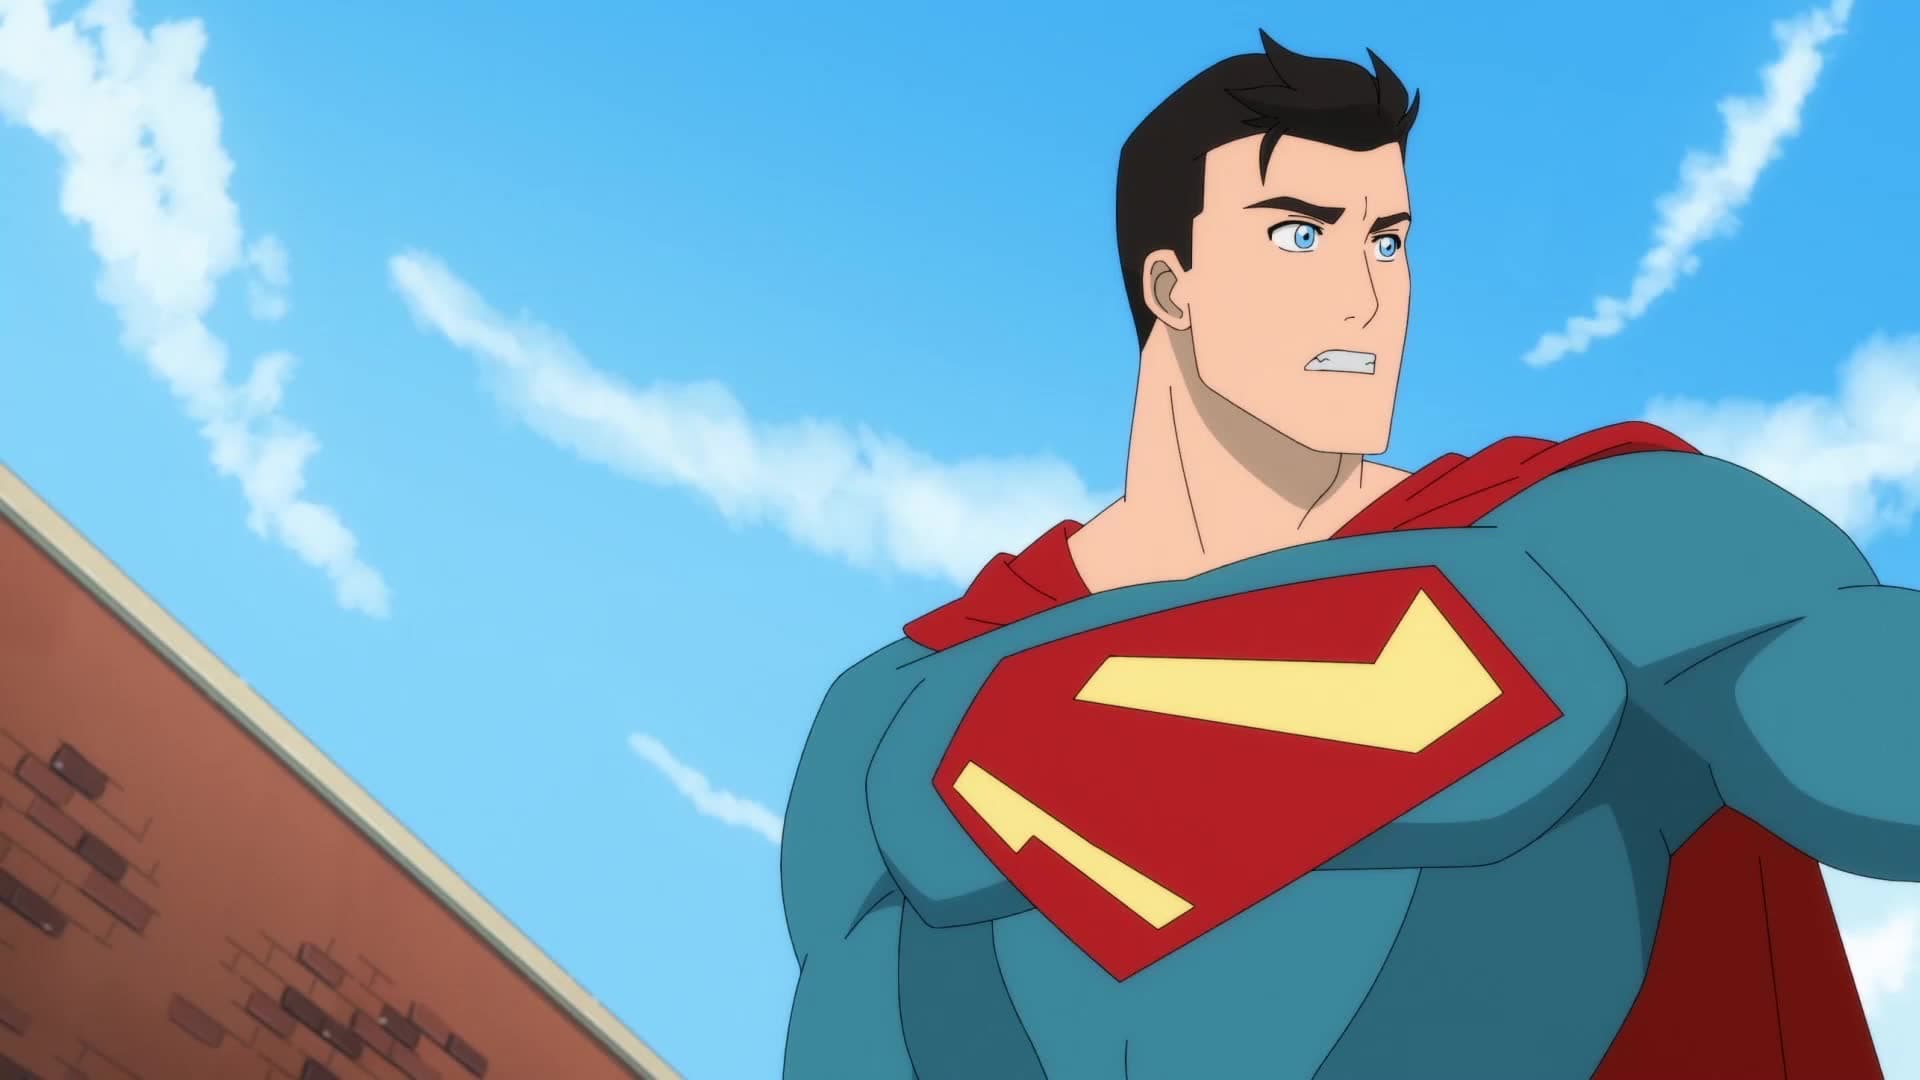 My Adventures with Superman S01E05